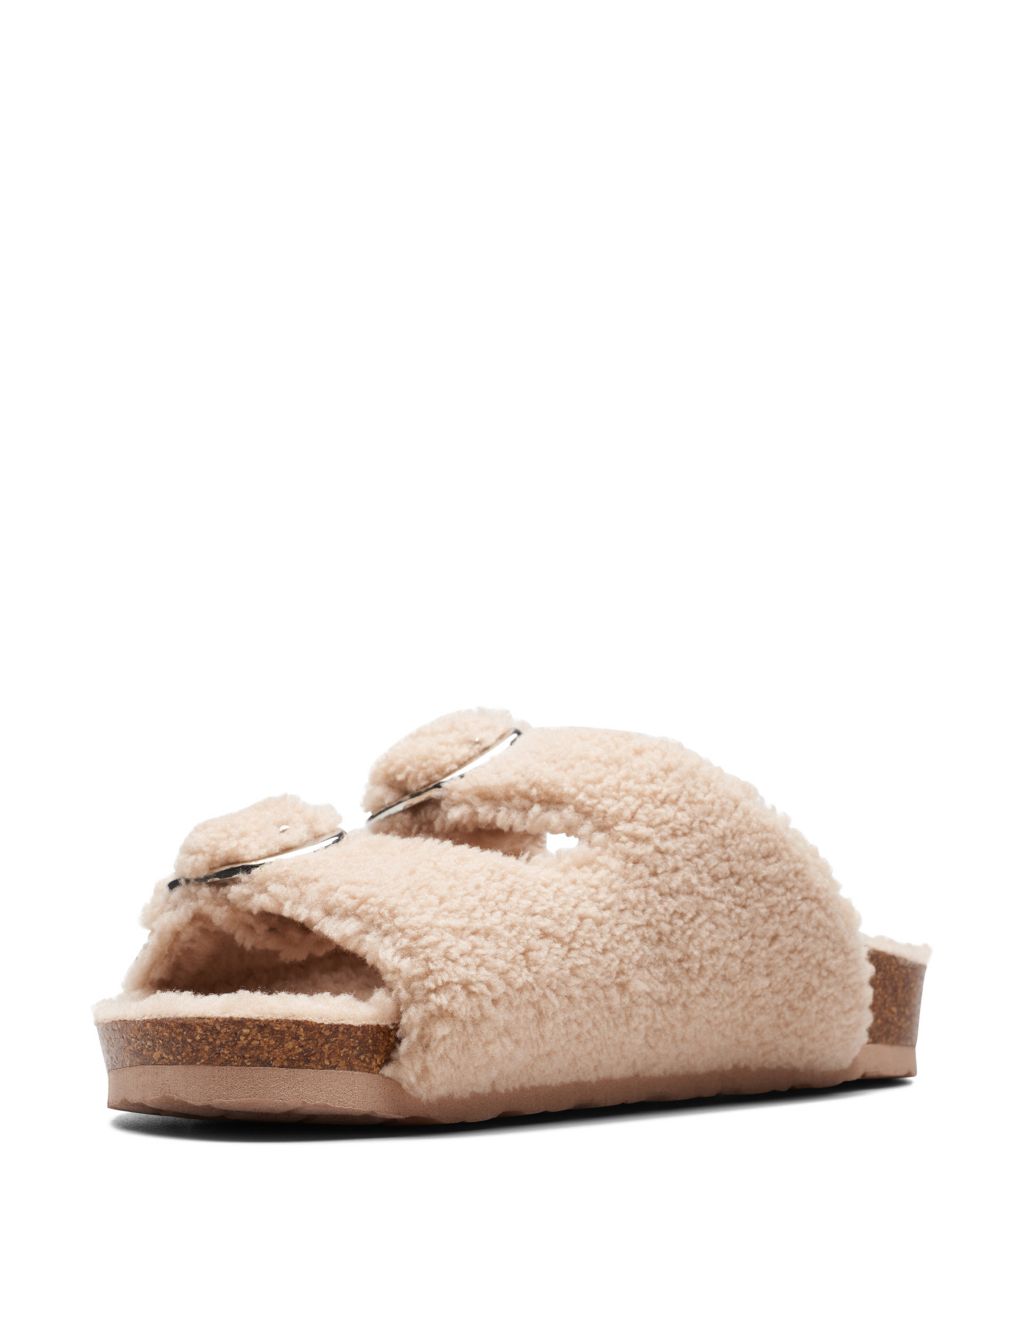 Faux Shearling Buckle Slider Slippers image 4